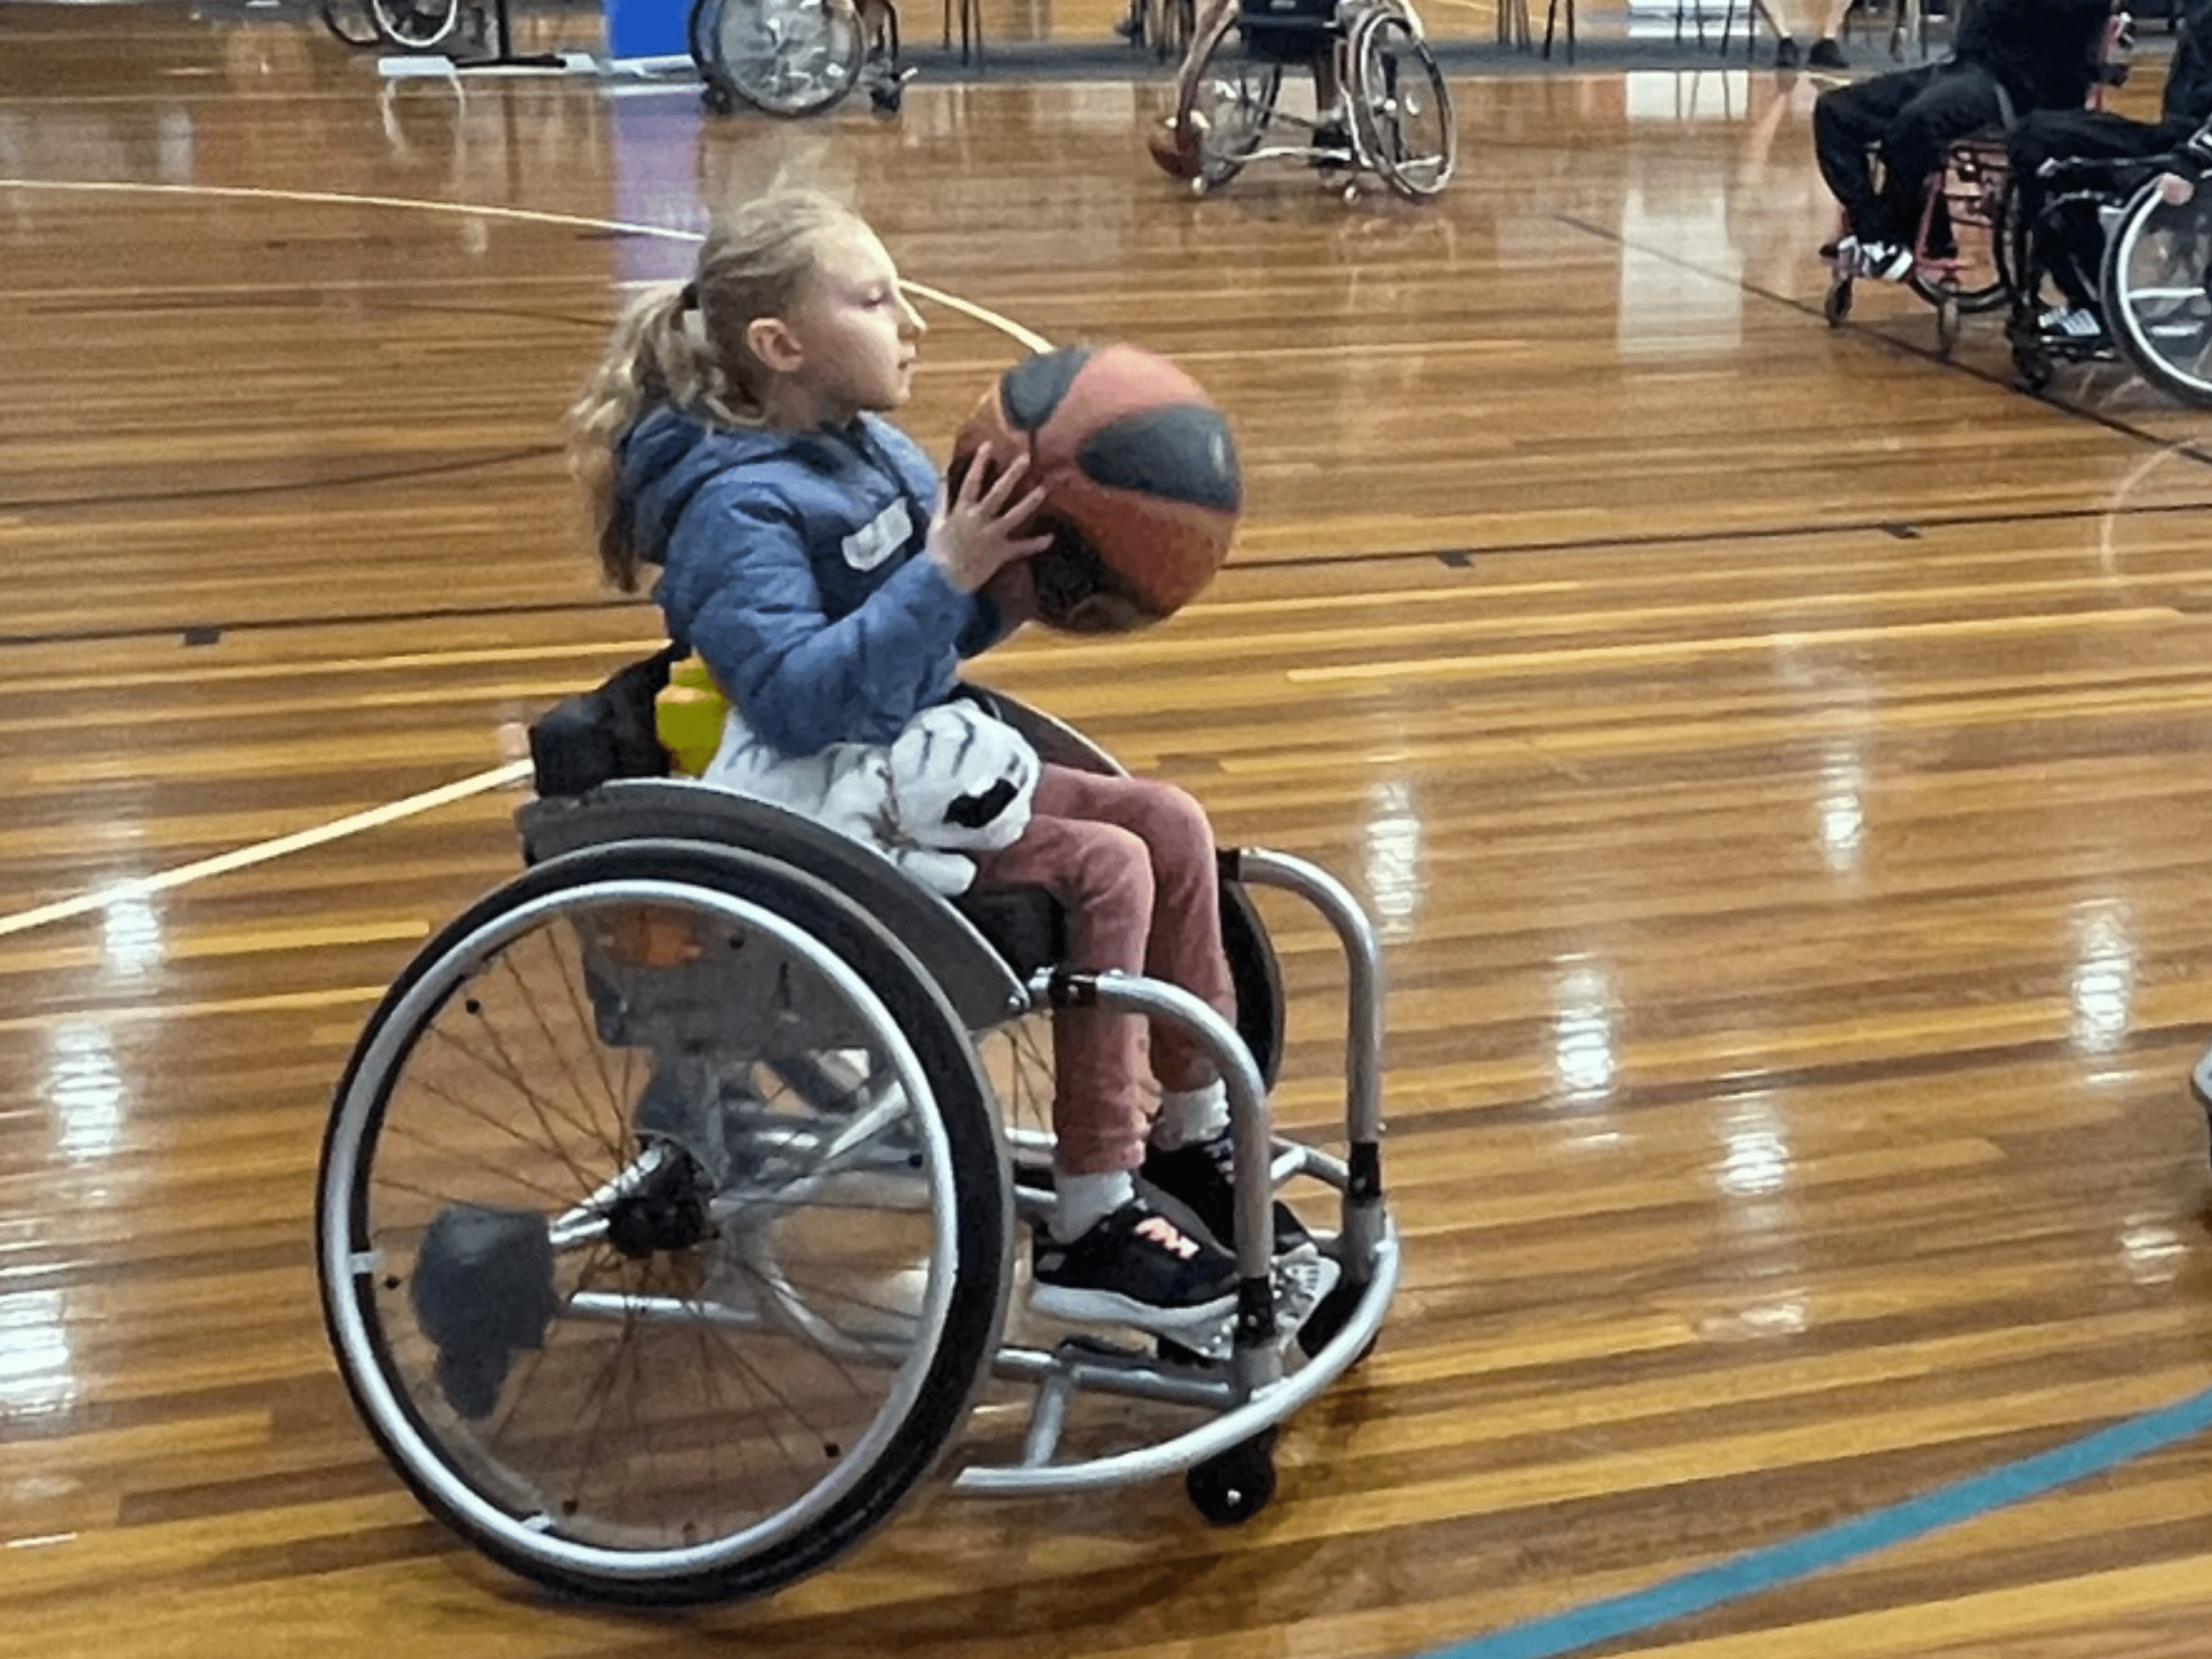 A young girl plays wheelchair basketball on the court.